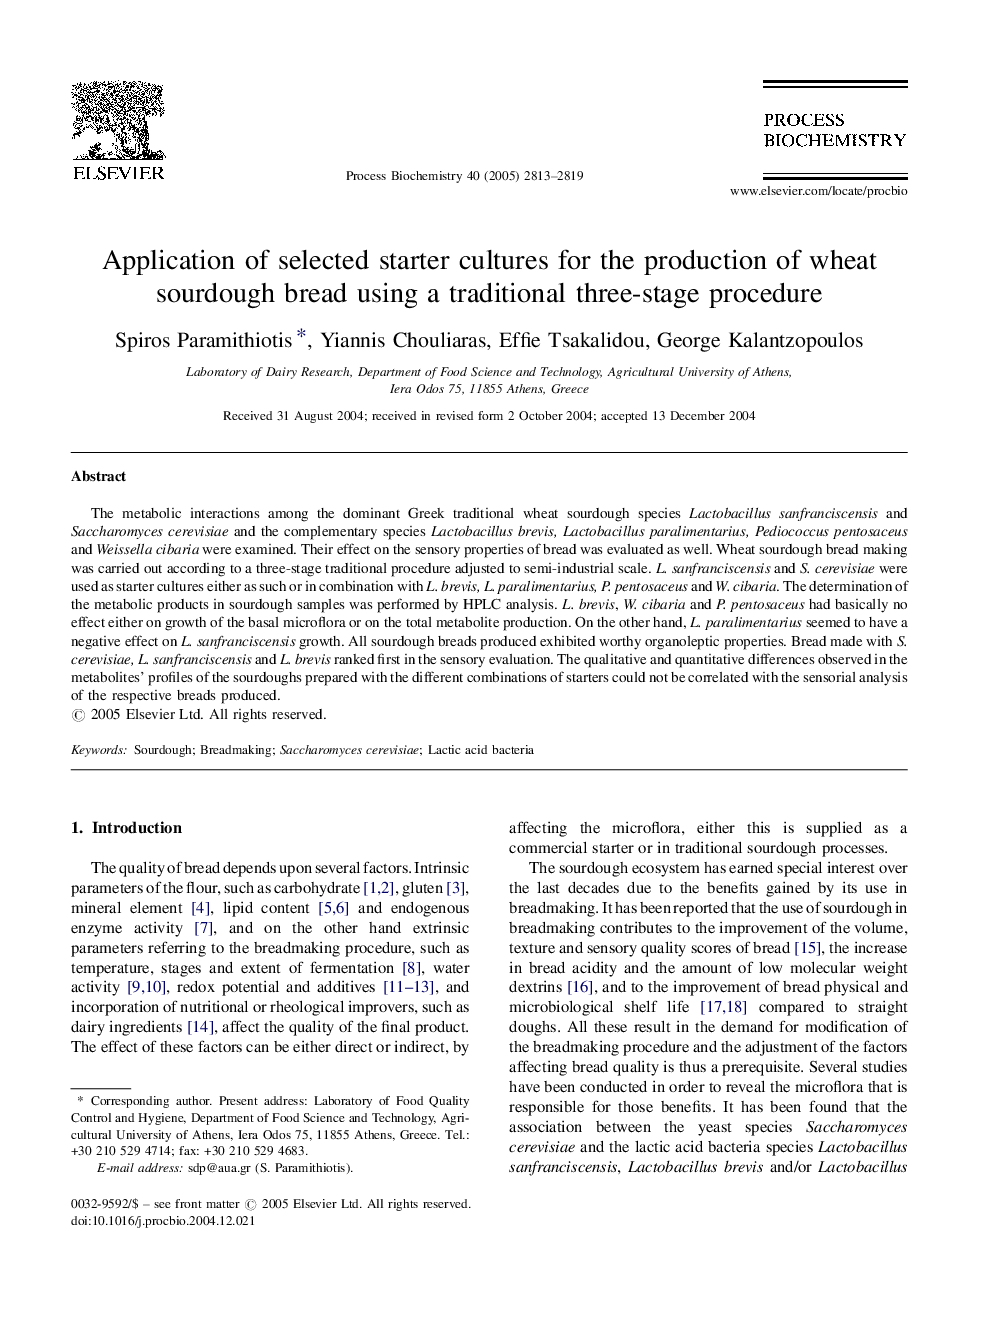 Application of selected starter cultures for the production of wheat sourdough bread using a traditional three-stage procedure